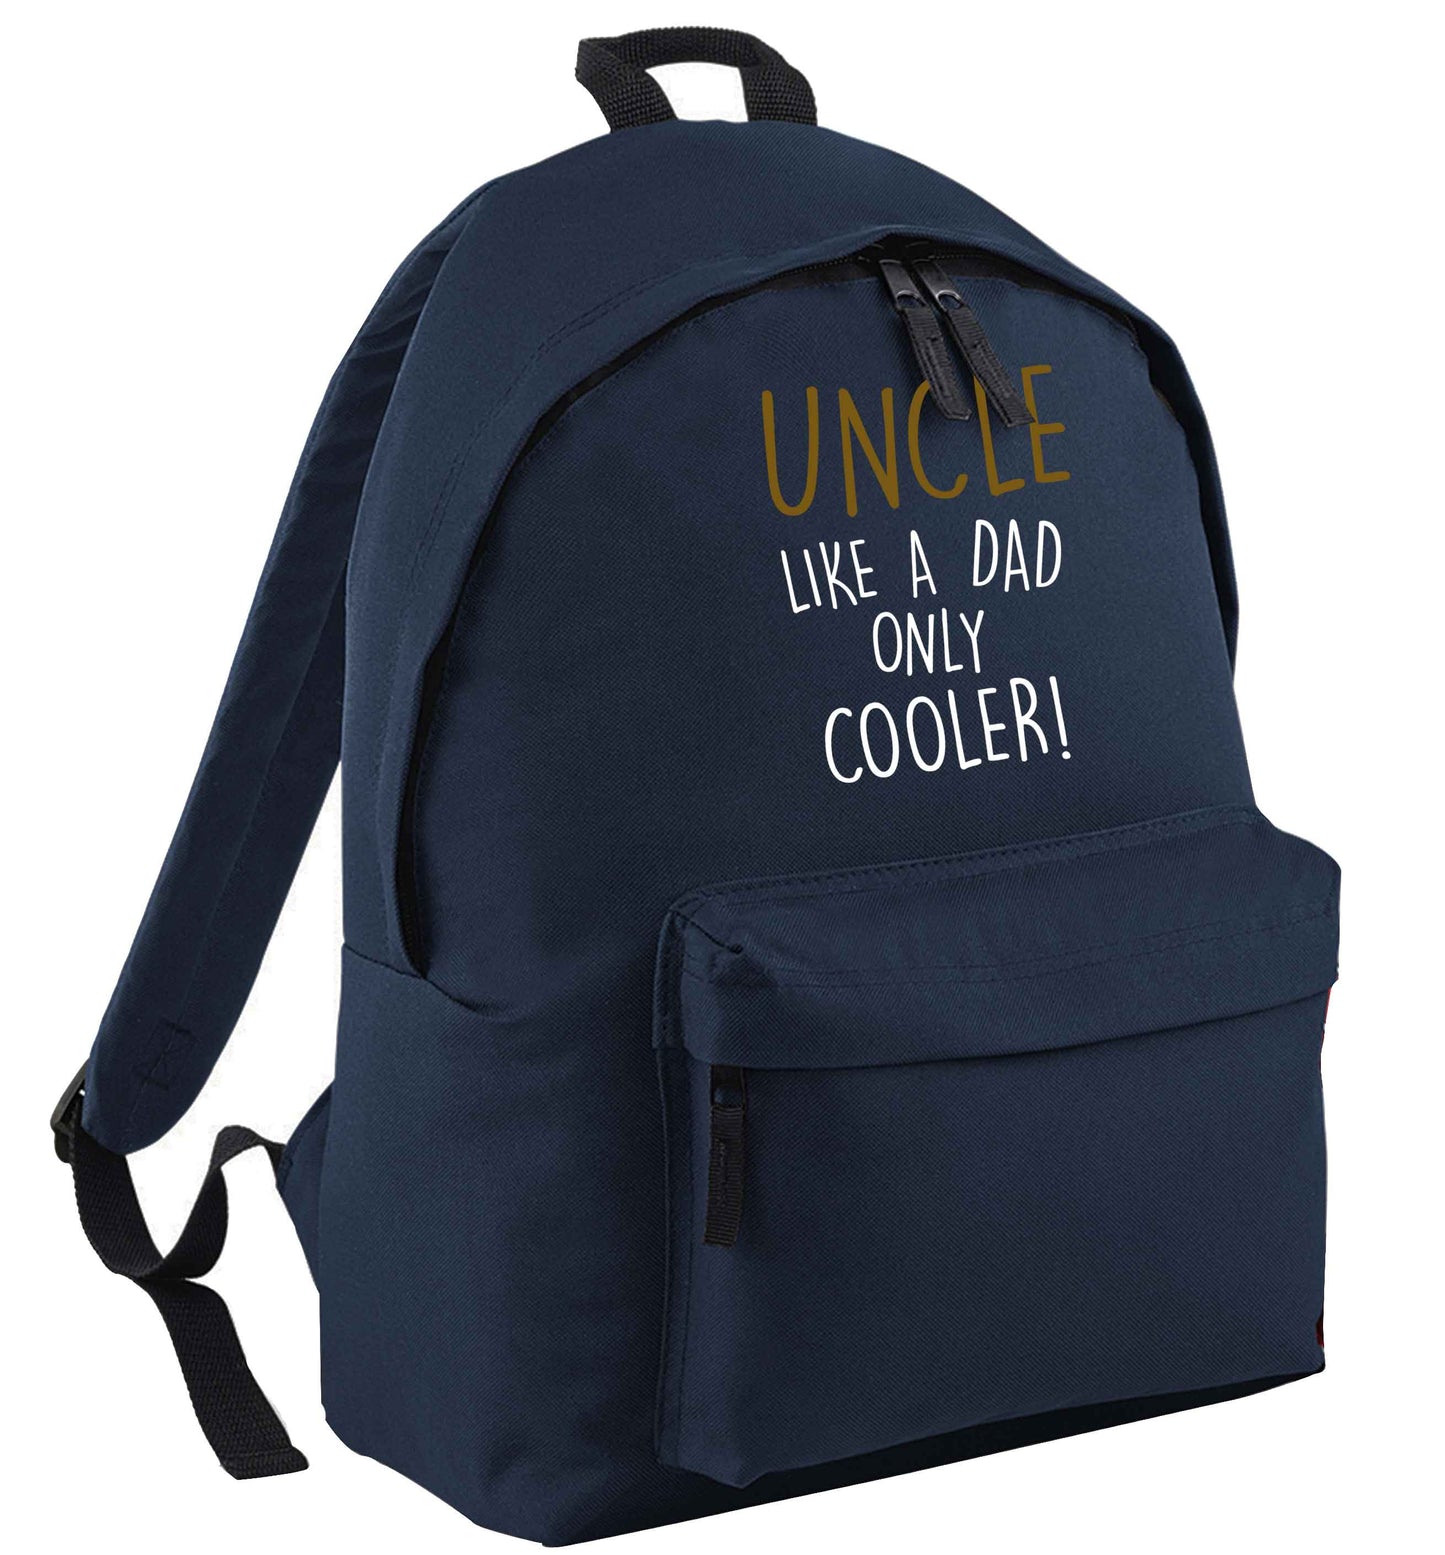 Uncle like a dad only cooler navy adults backpack